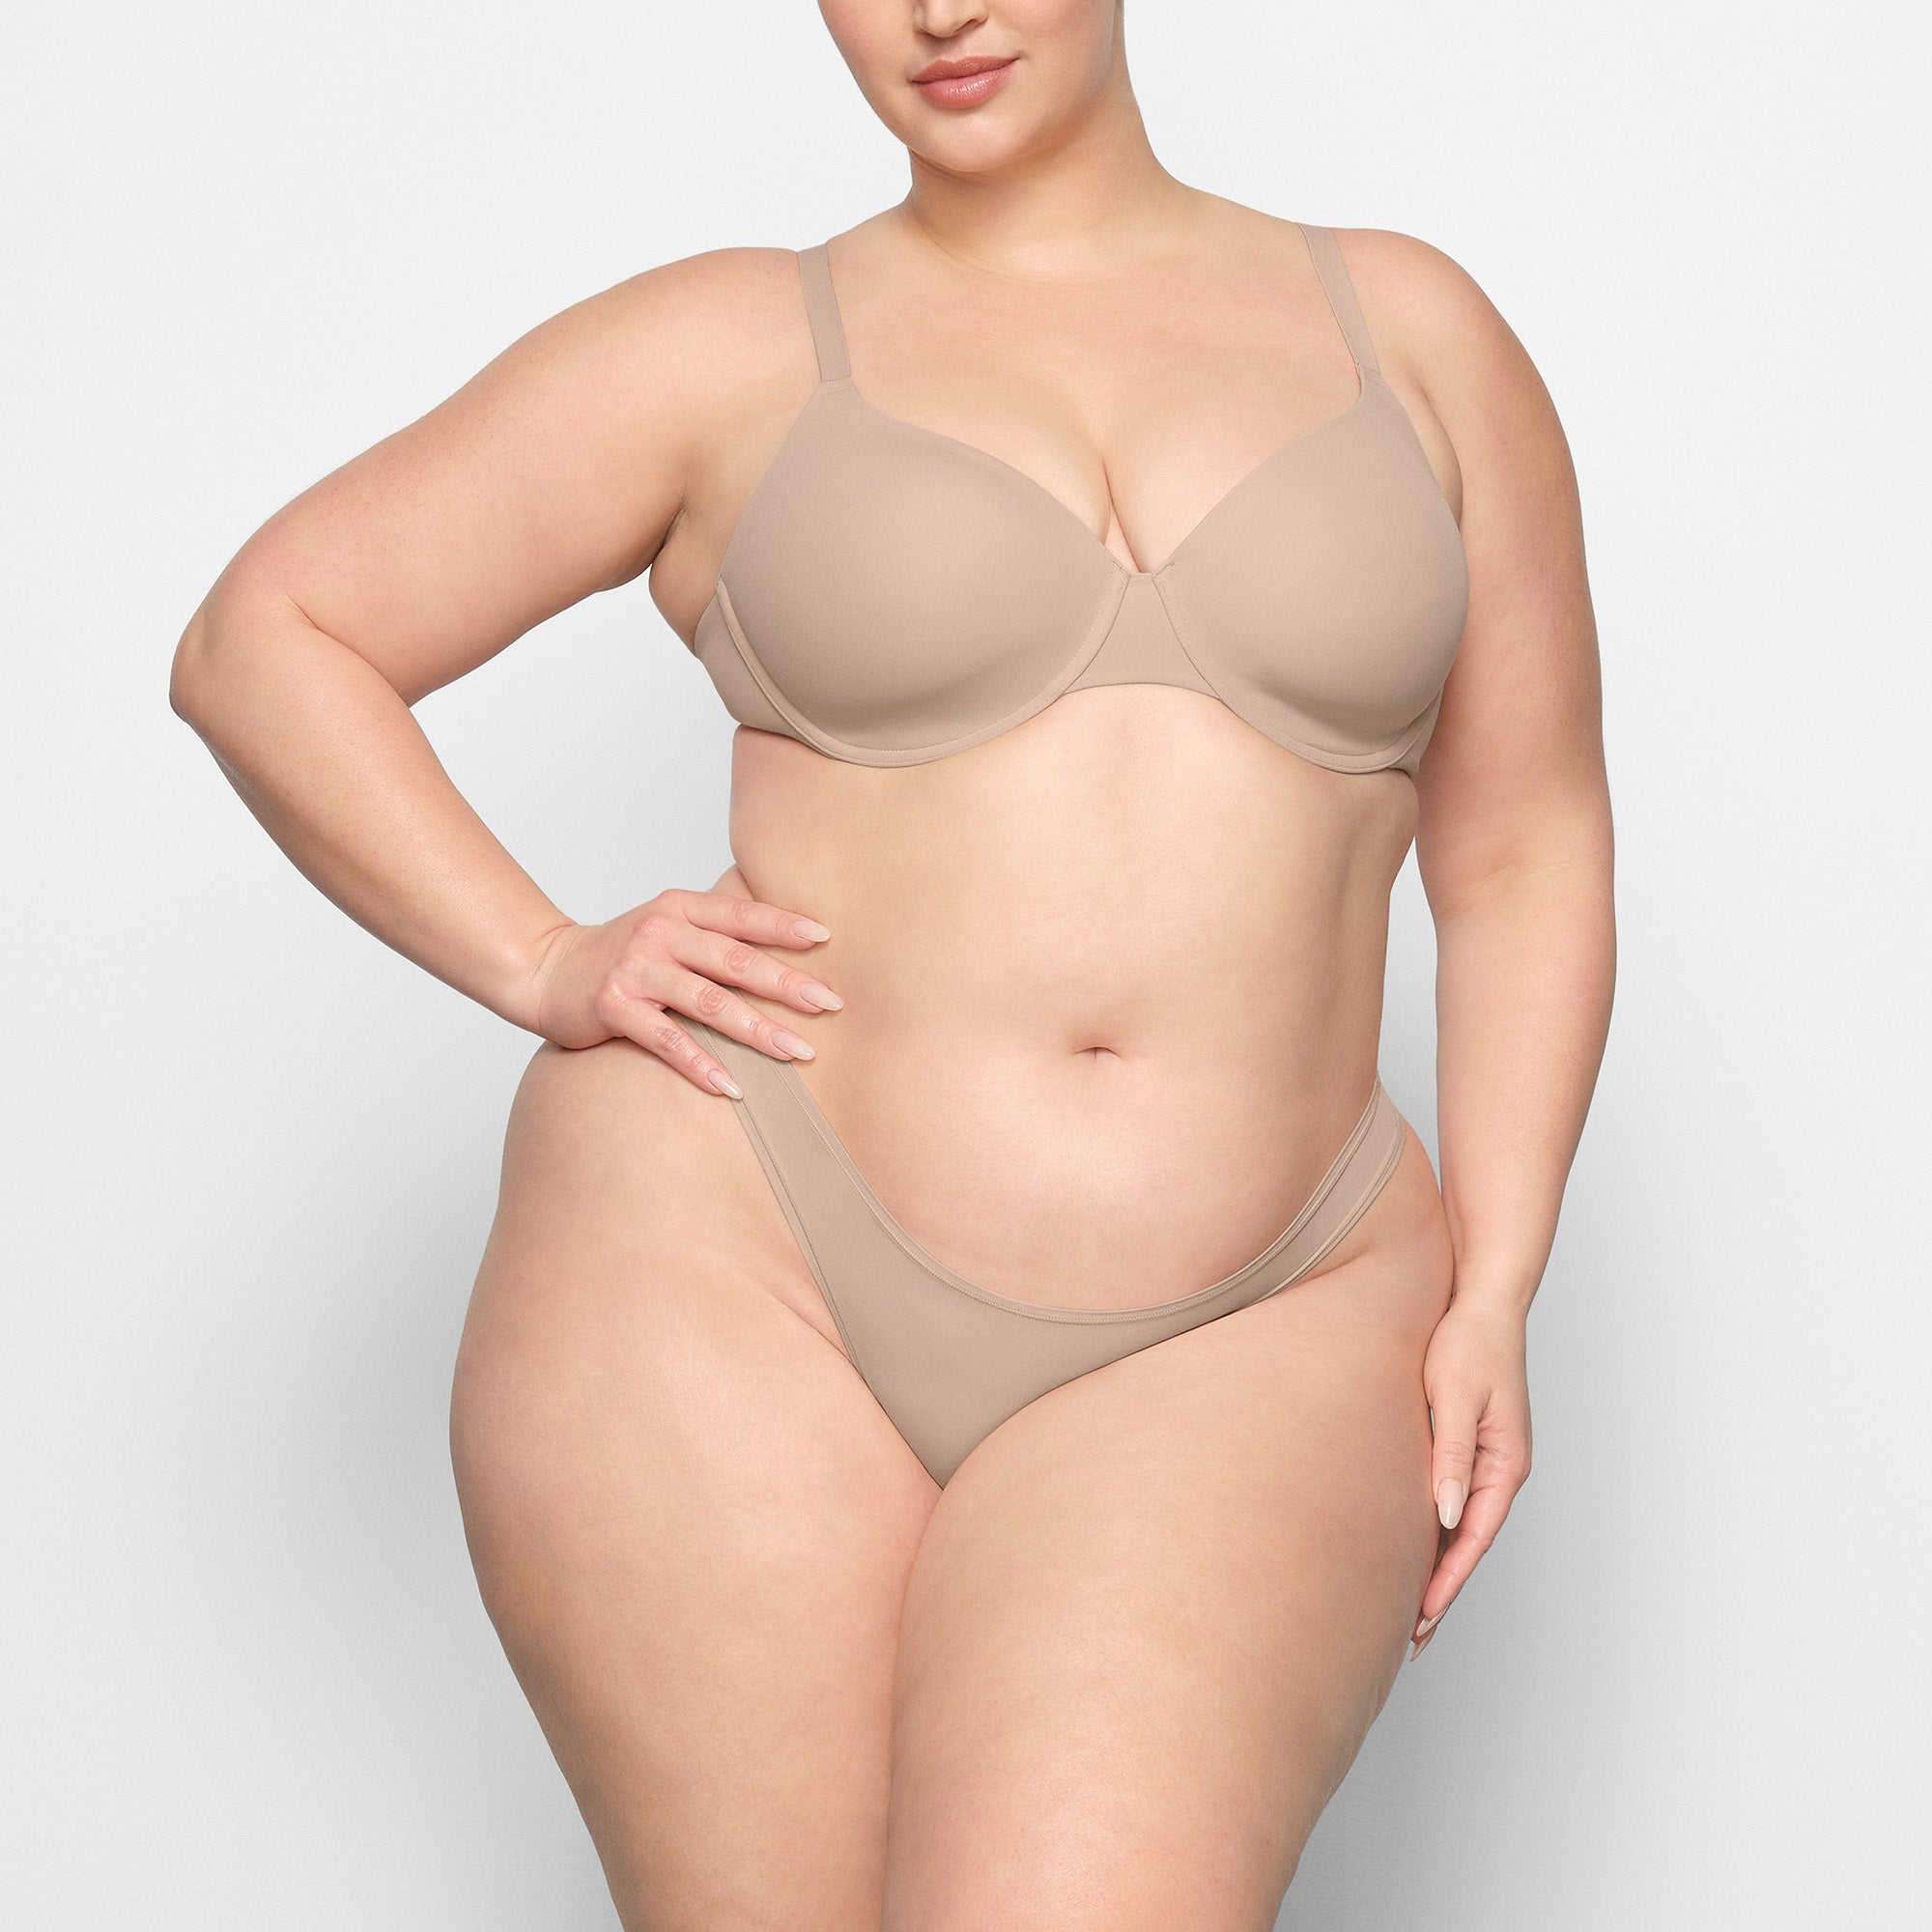 SKIMS NWT Fits Everybody T-Shirt Underwire Push Up Bra. 34C Tan Size 34 C -  $44 (24% Off Retail) New With Tags - From Devyn